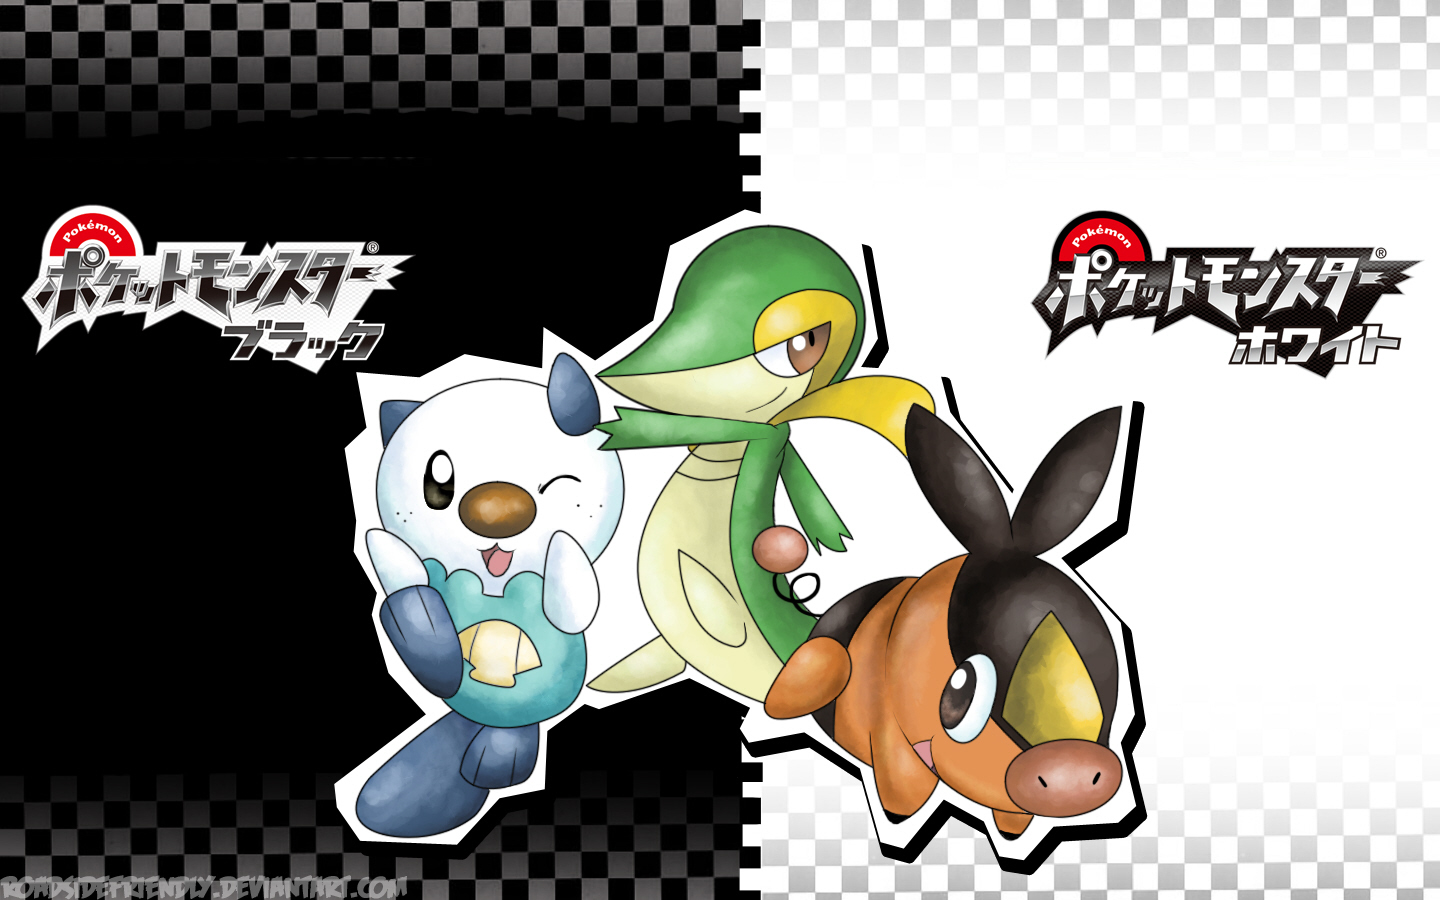 Pokemon: Black and White Wallpapers